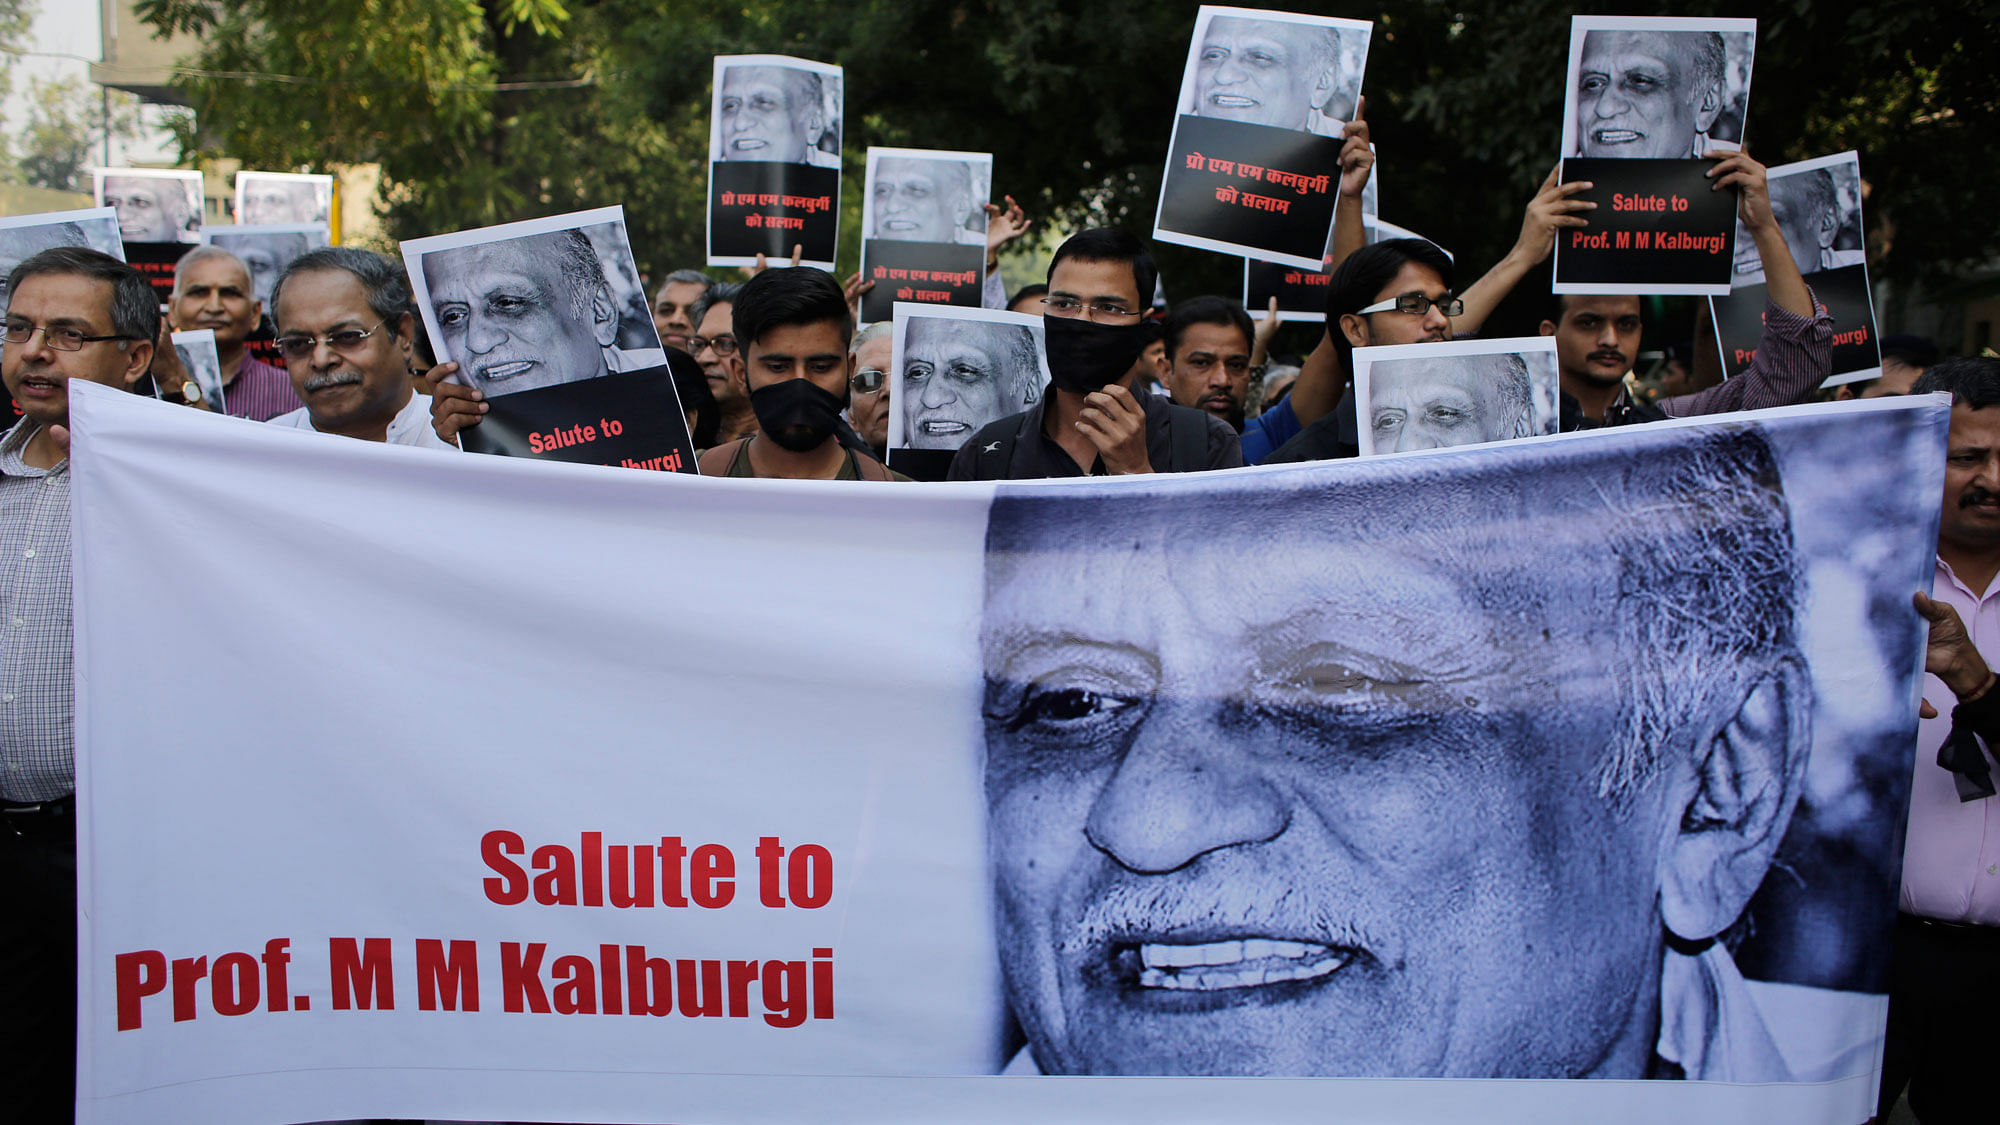 Writers protest against the slow investigation in MM Kalburgi’s murder.